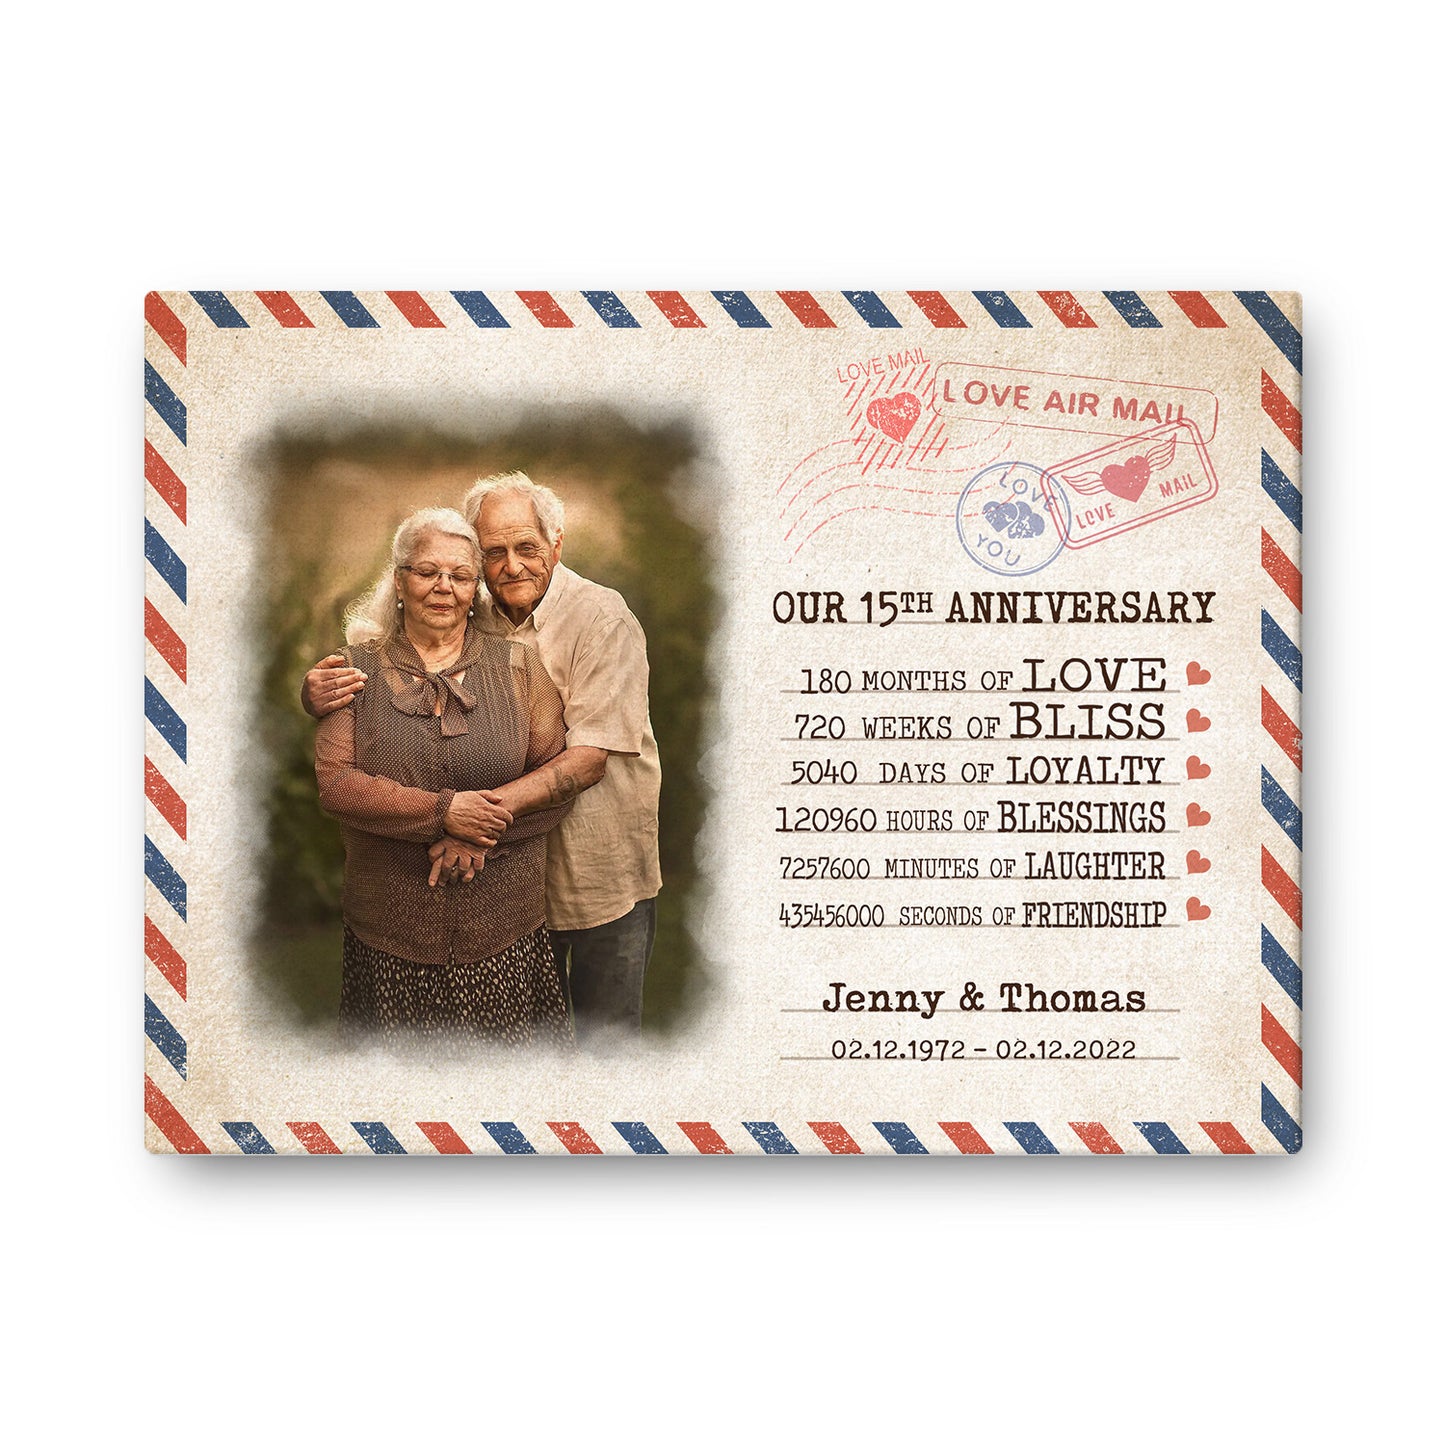 Our 15th Anniversary Letter Valentine Gift Personalized Canvas